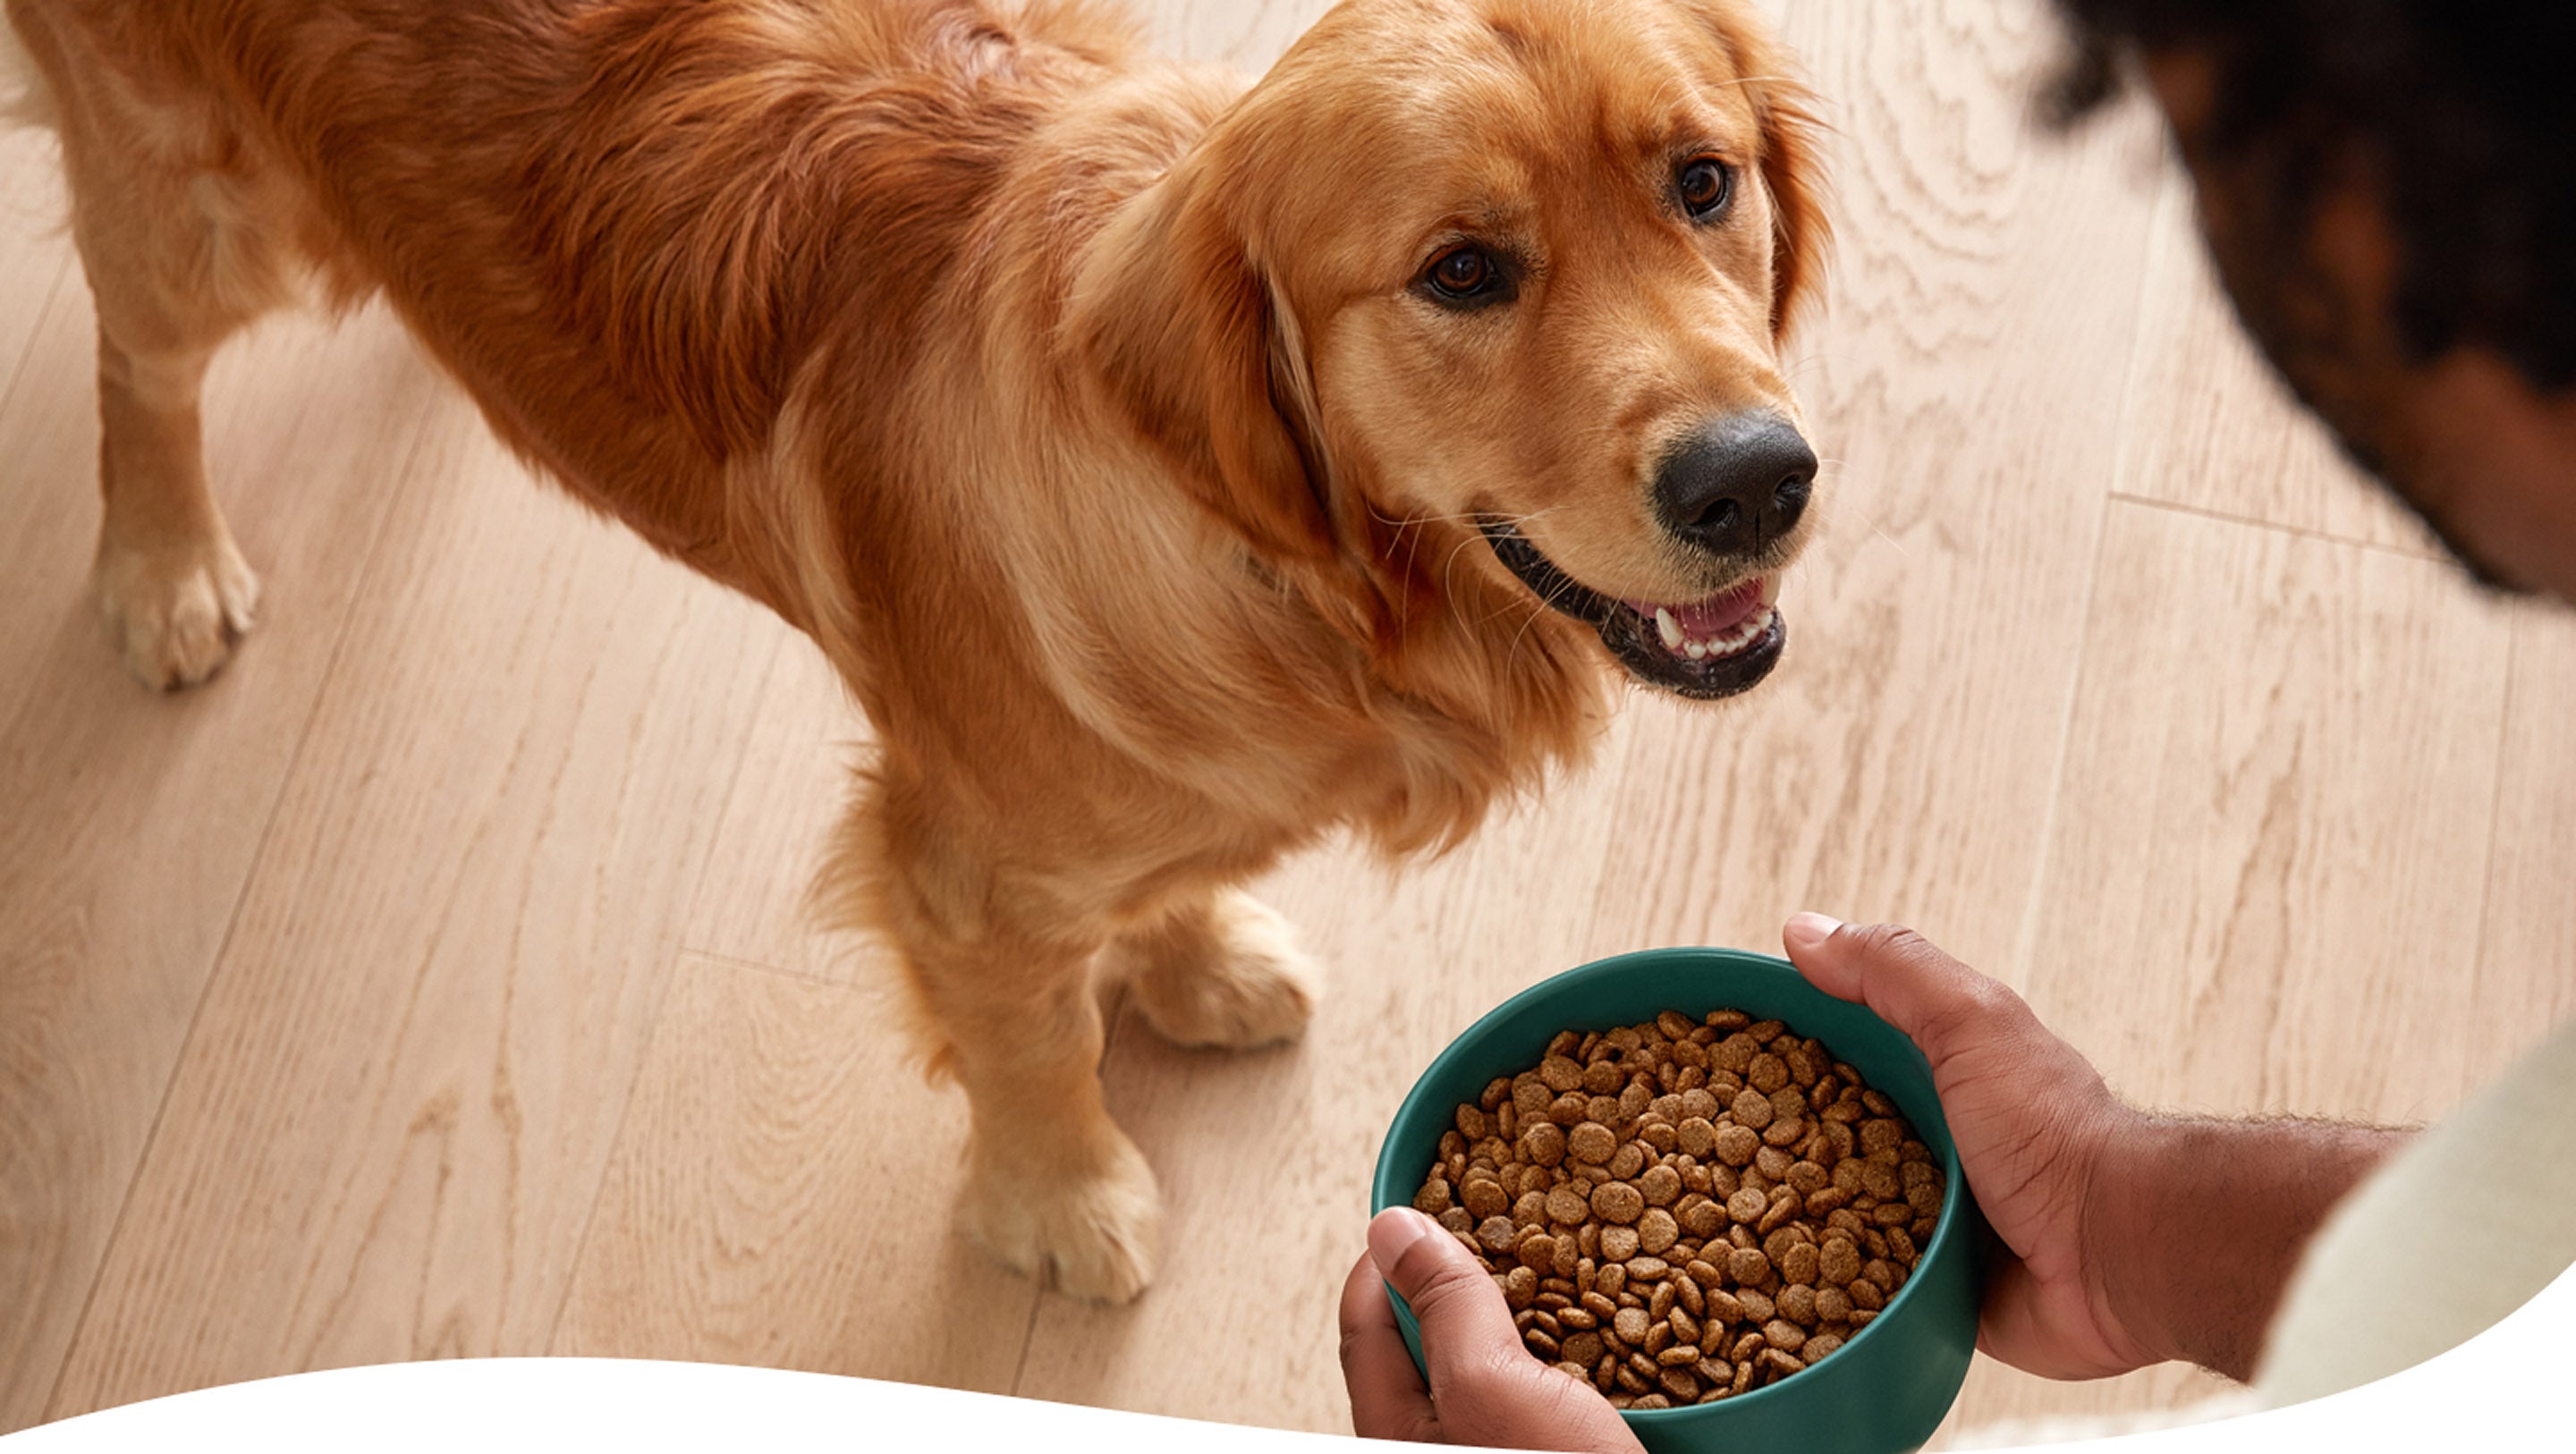 Point of view image of someone about to place a bowl of Jinx dry food in front of a golden retriever